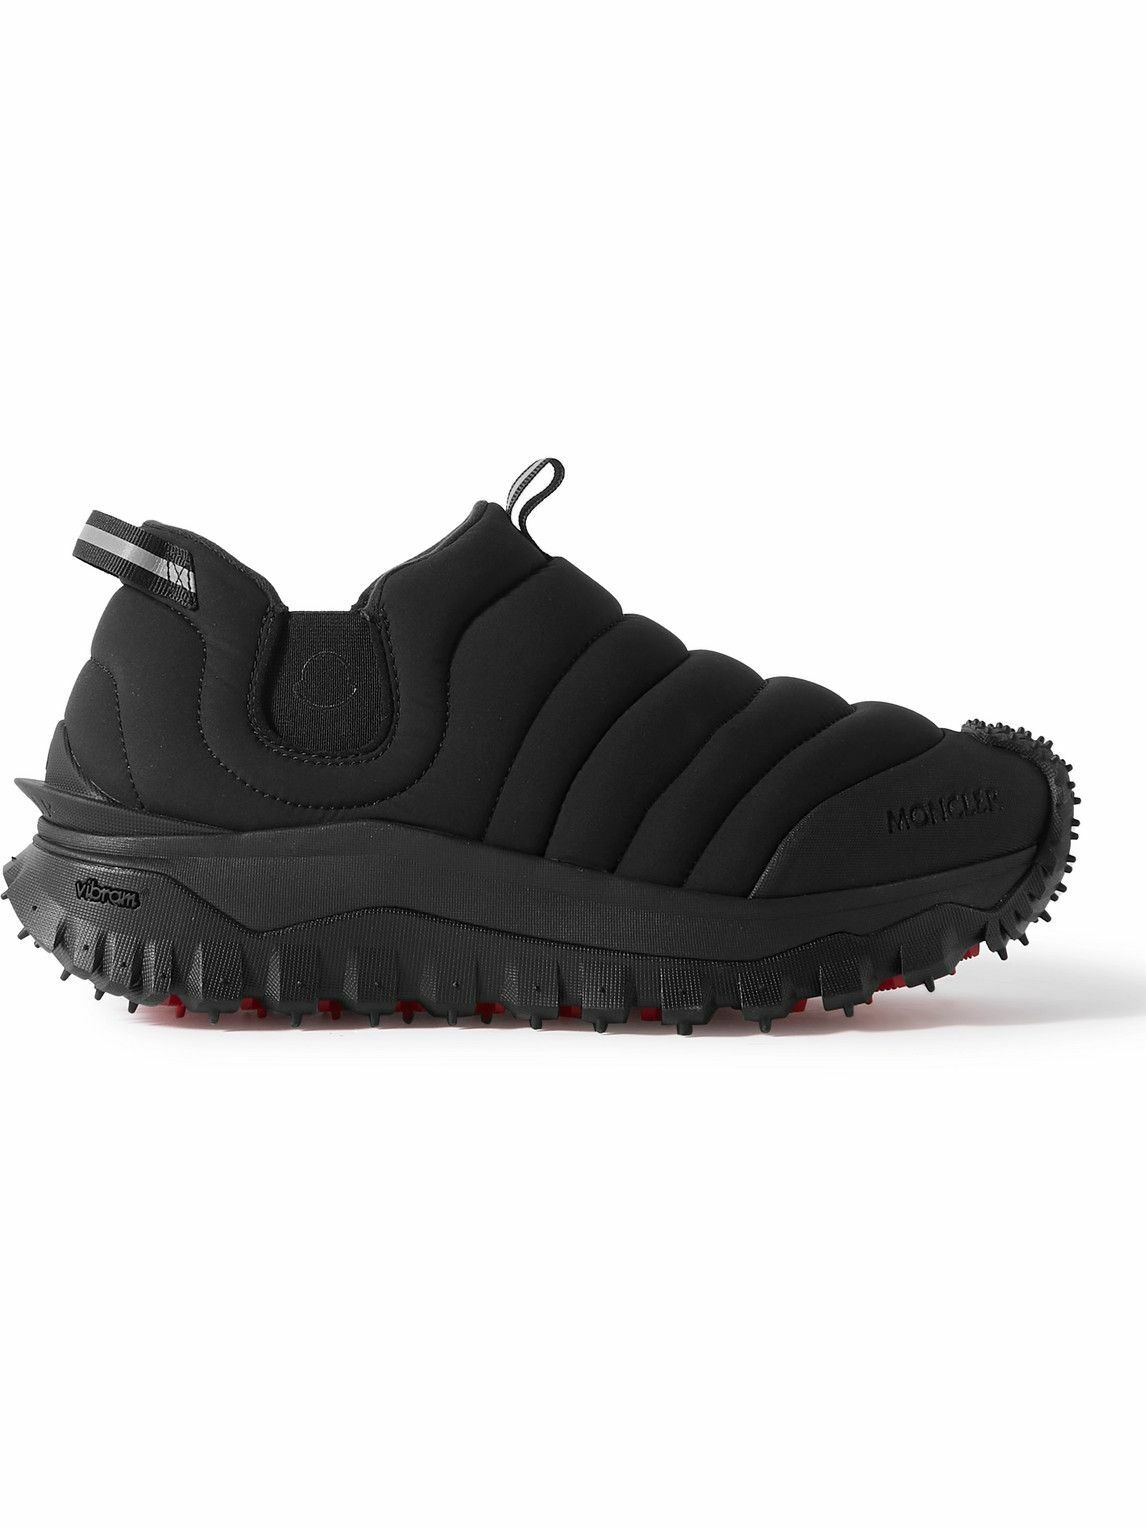 Moncler - Trailgrip Après Quilted Shell Slip-On Sneakers - Black Moncler